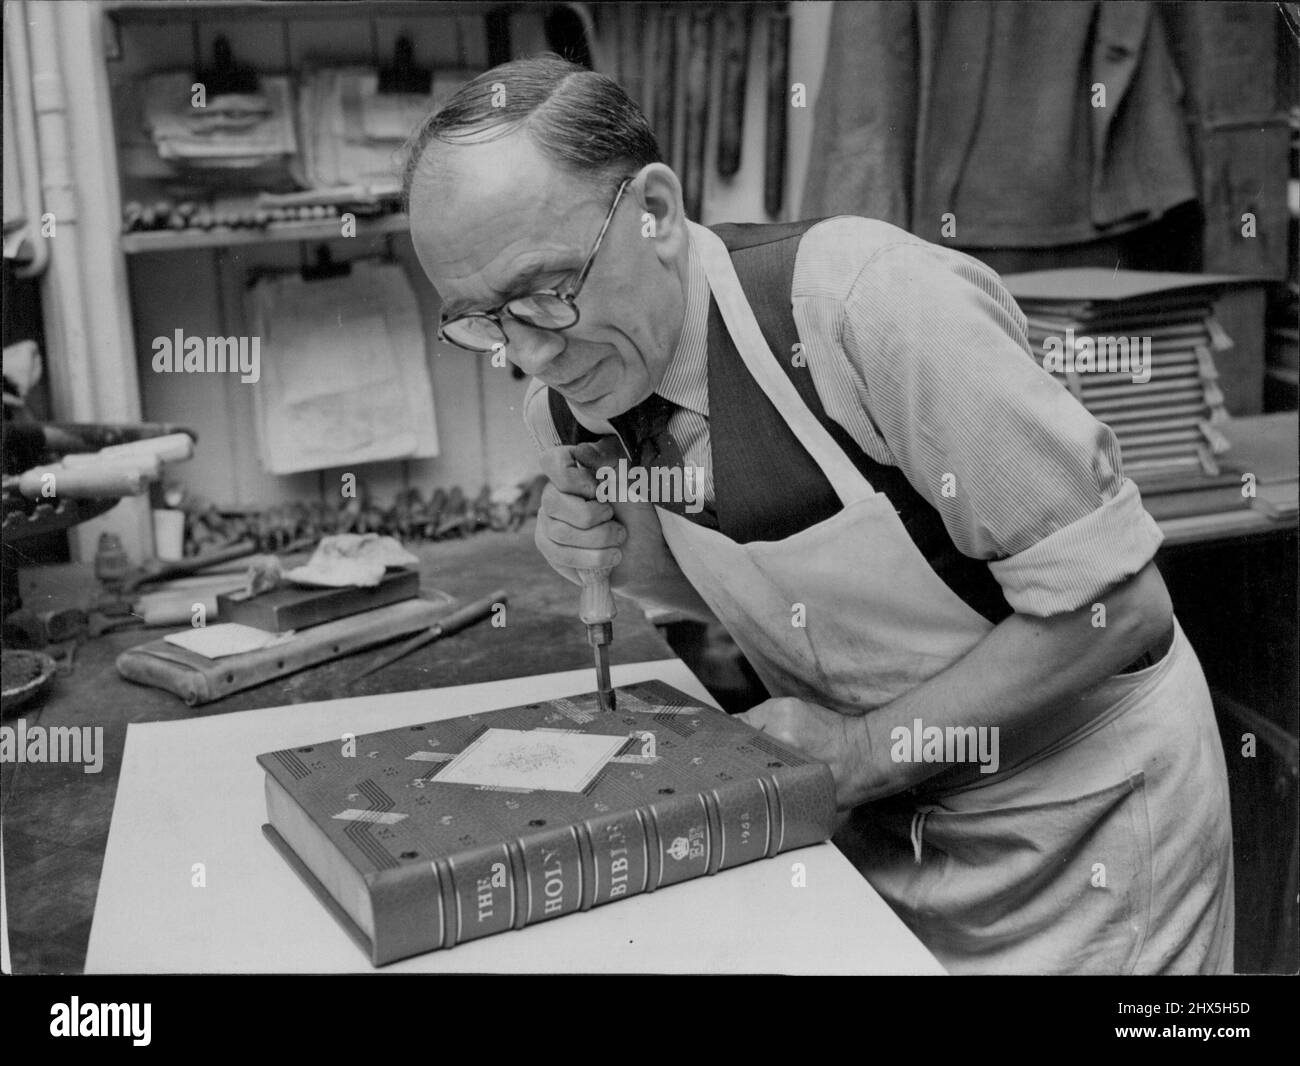 London Craftsman Works on Coronation Bible. Mr. Edgar Turner handtooling with gold leaf the Coronation Bible, which will play an important part in the Westminster Abbey Service. The massive Lectern Bible, one of an edition of twenty-five copies printed by the Oxford University Press is being bound at Messrs. Sangorski and Sutcliffe's book binding works in London. Mrs. Turner, who lives at Forest Hill, London, has been with the firm for 35 years. May 12, 1953. Stock Photo